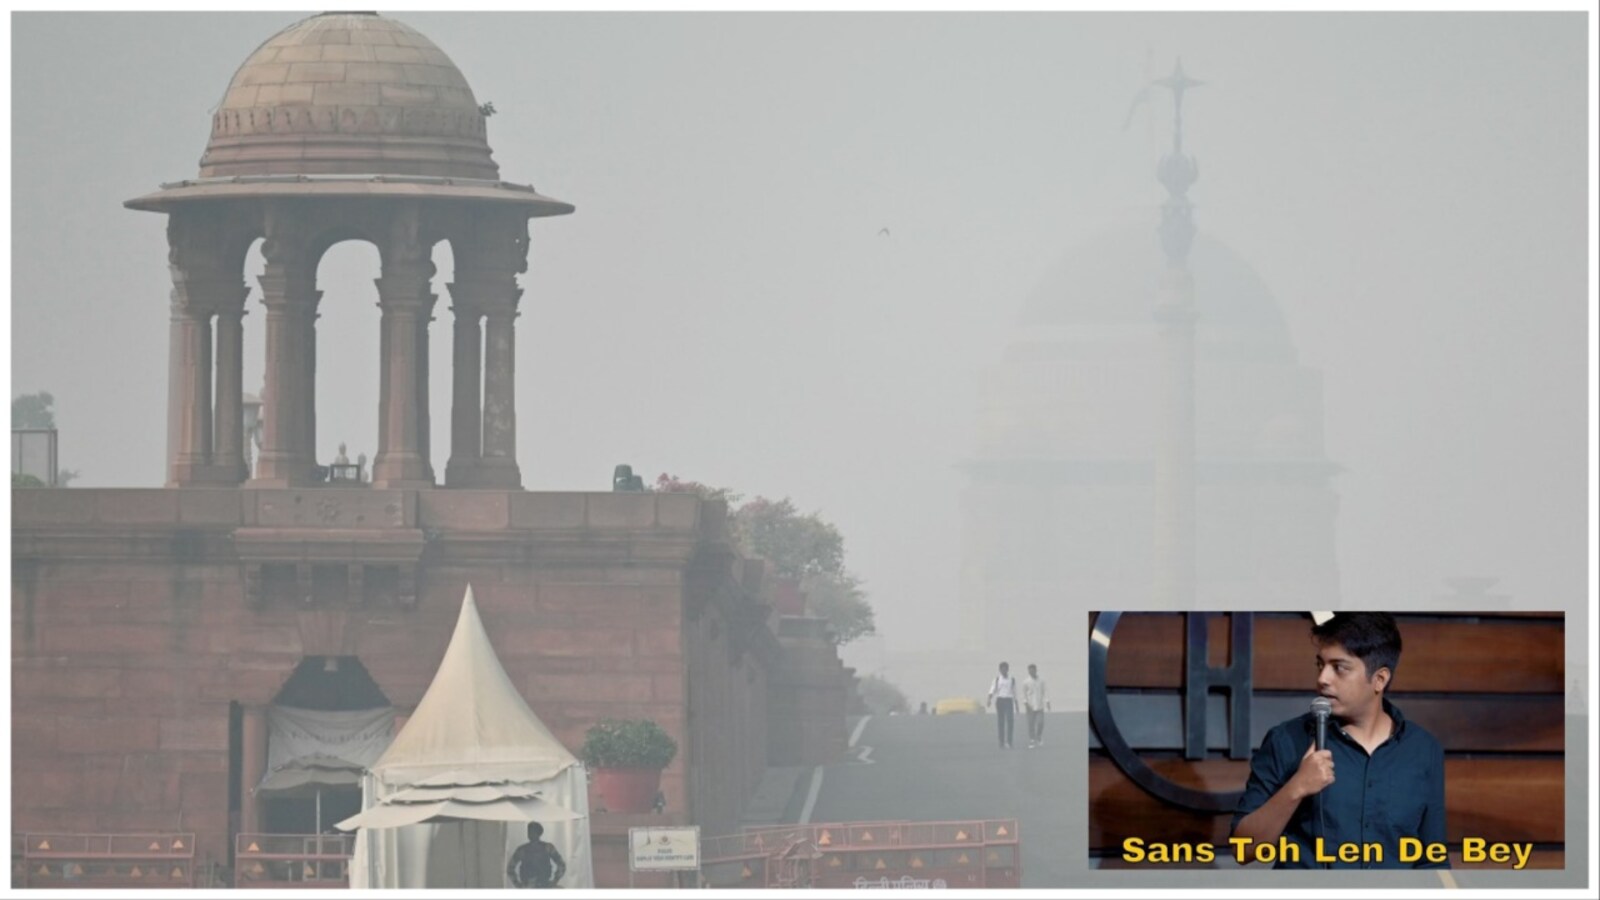 Delhi Pollution Memes Take Over Internet As Air Quality Worsens To 'Severe